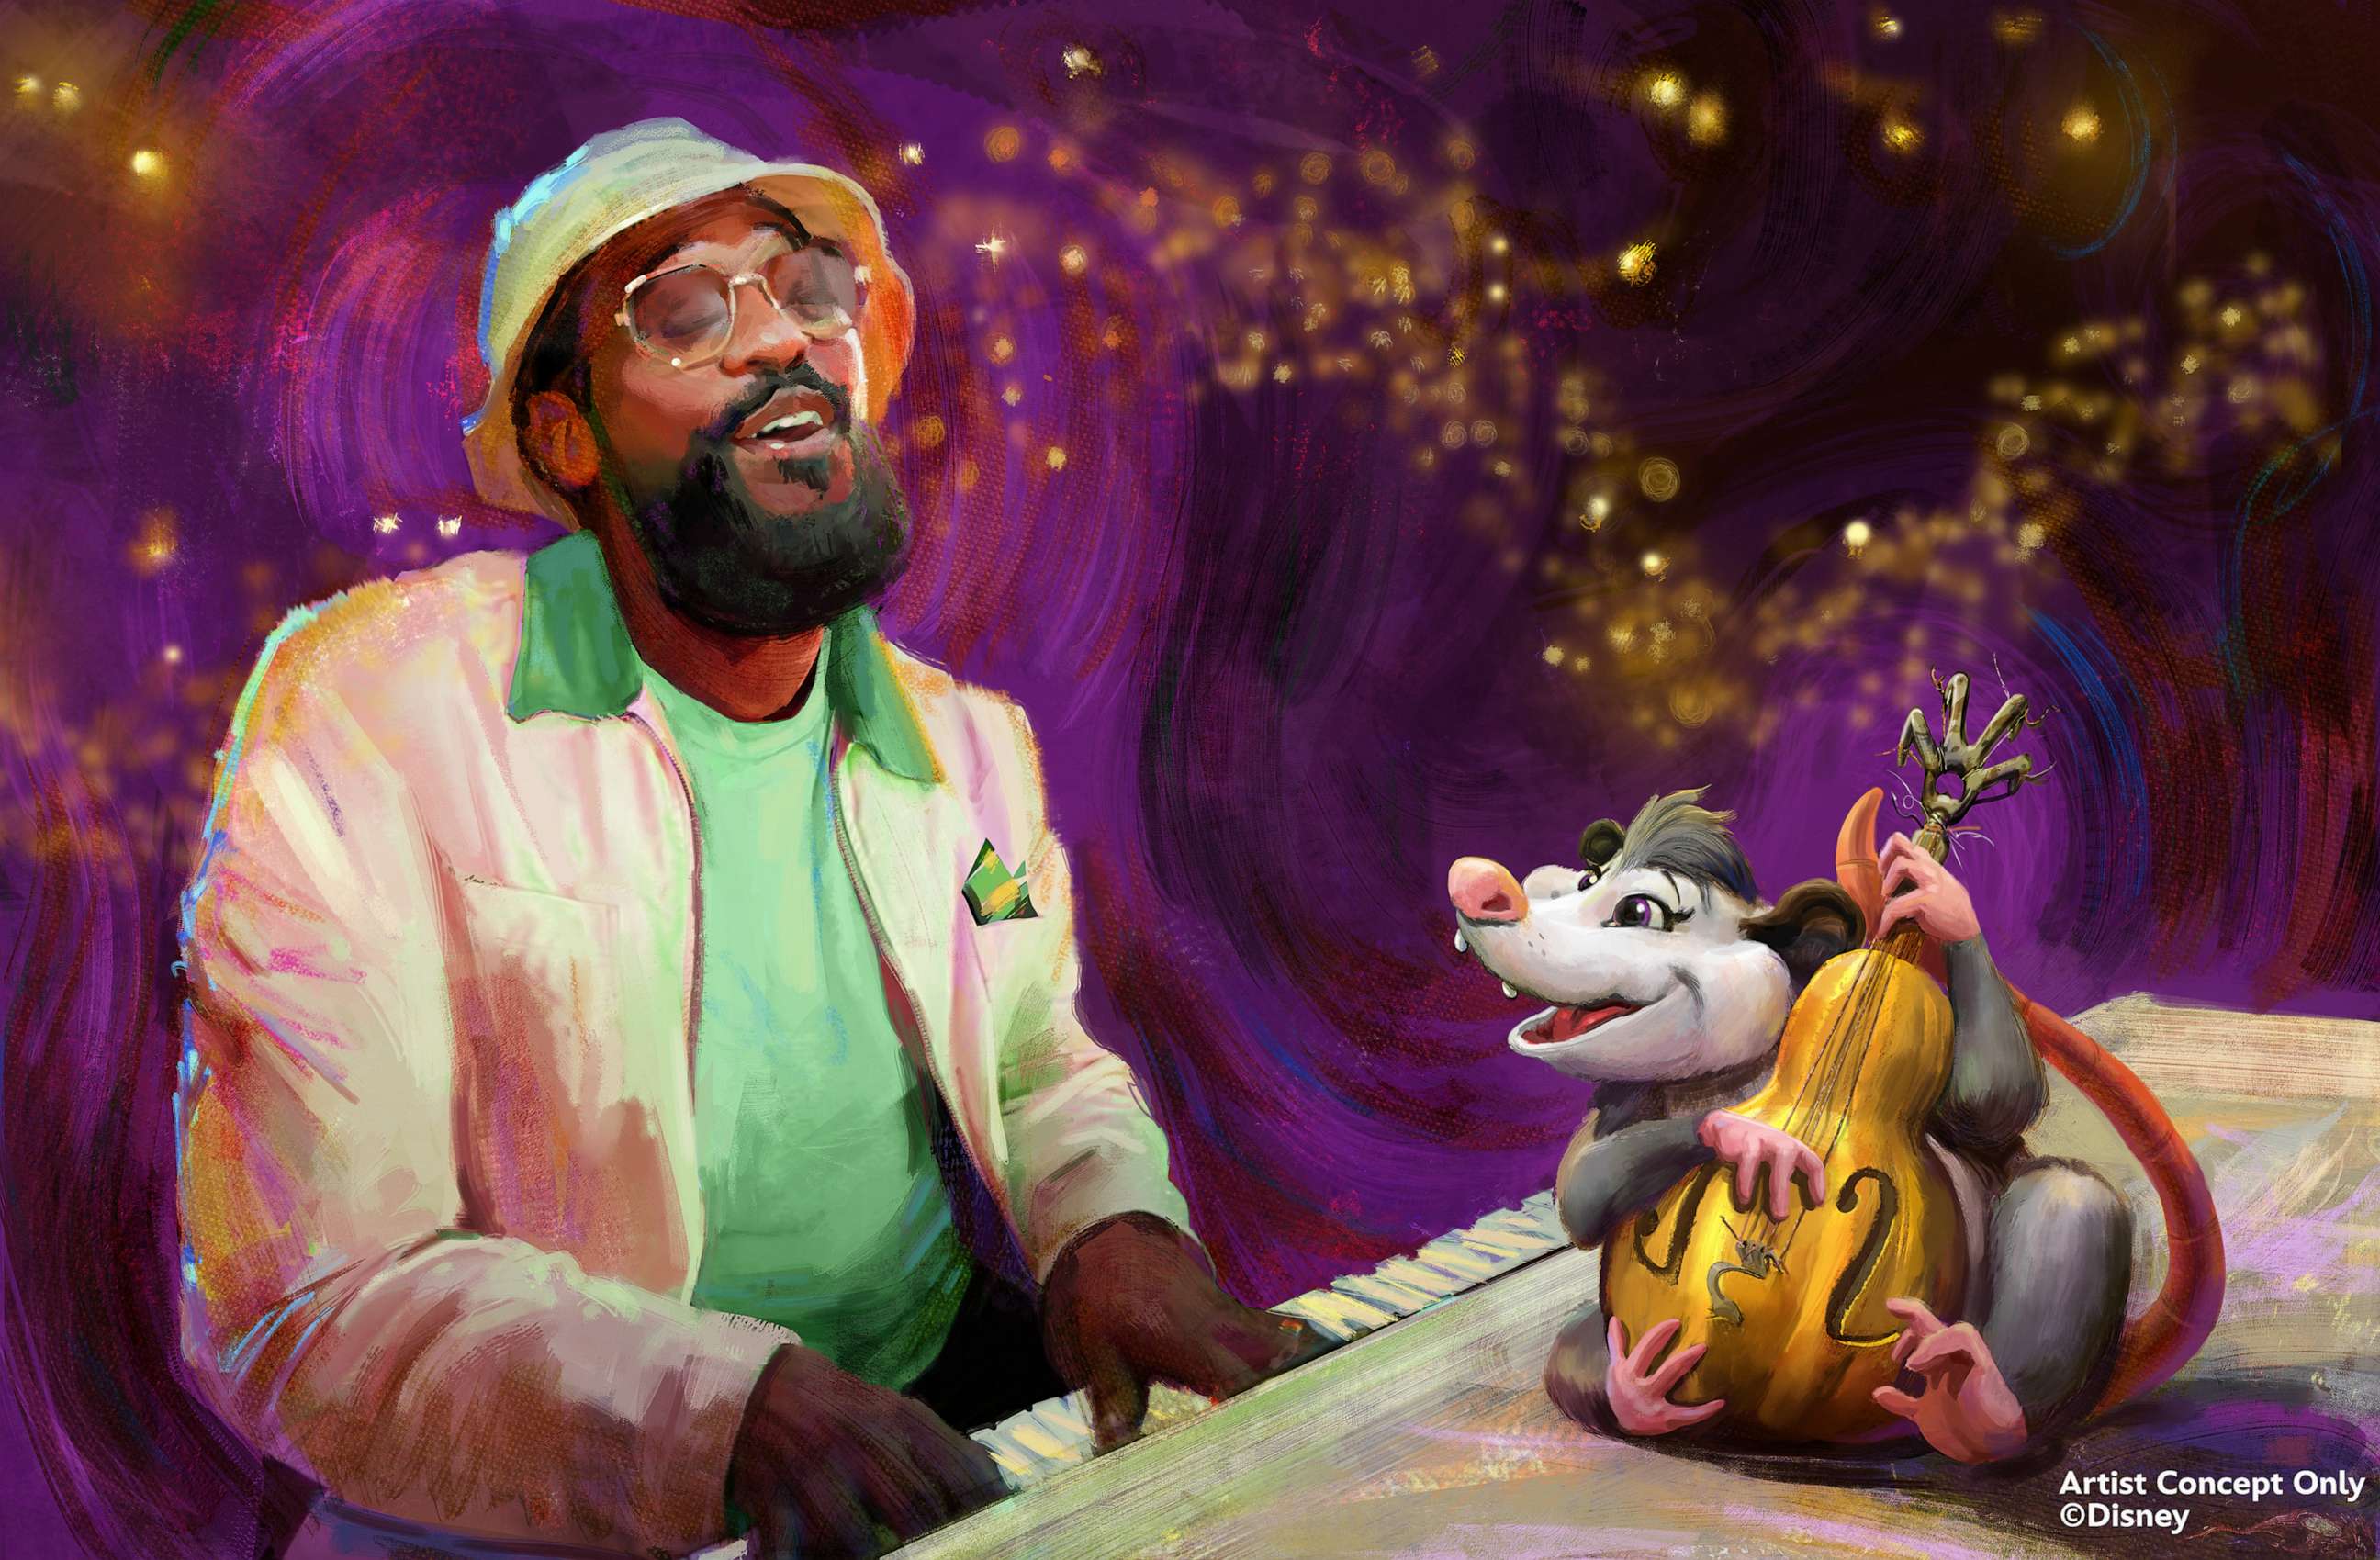 PHOTO: PJ Morton plays piano for Tiana's Bayou Adventure, the new Disney ride inspired by the hit 2009 animated film, "The Princess and the Frog."